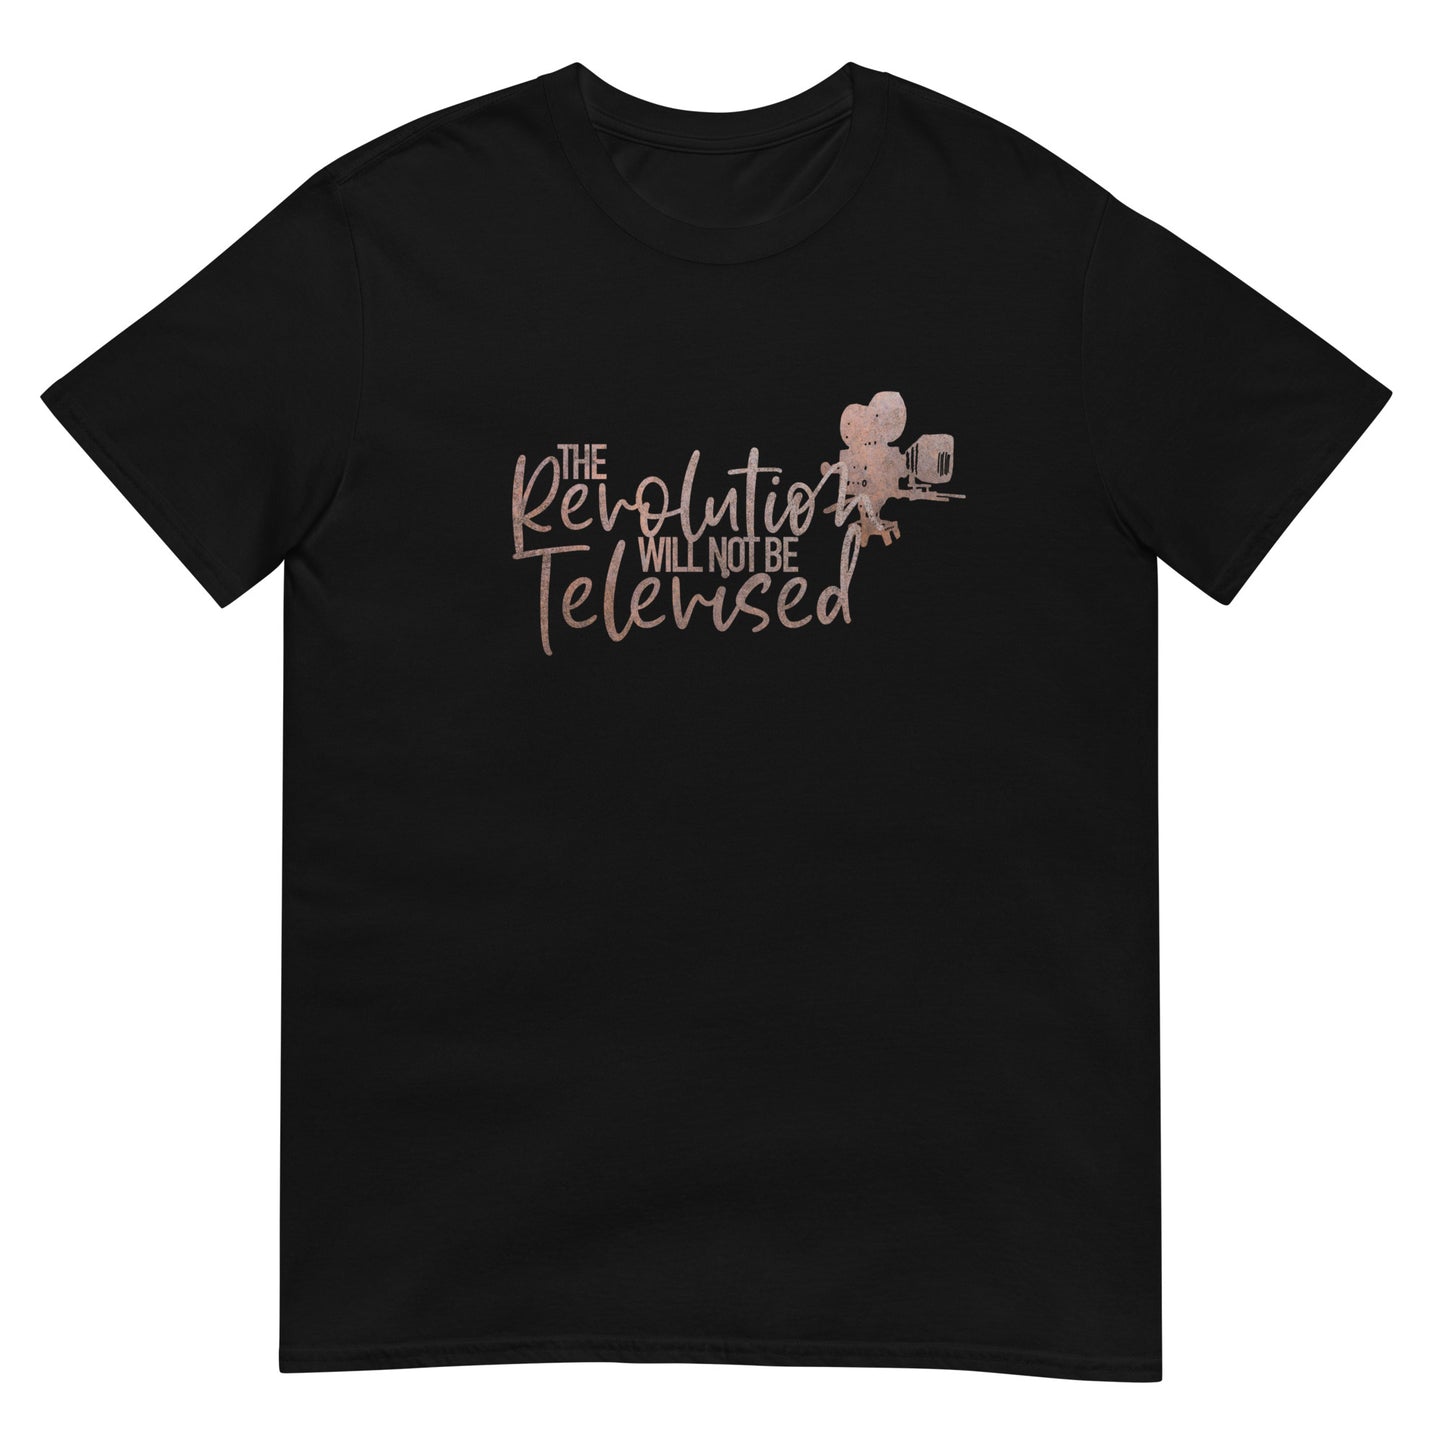 The Revolution Will Not Be Televised Short-Sleeve Unisex T-Shirt